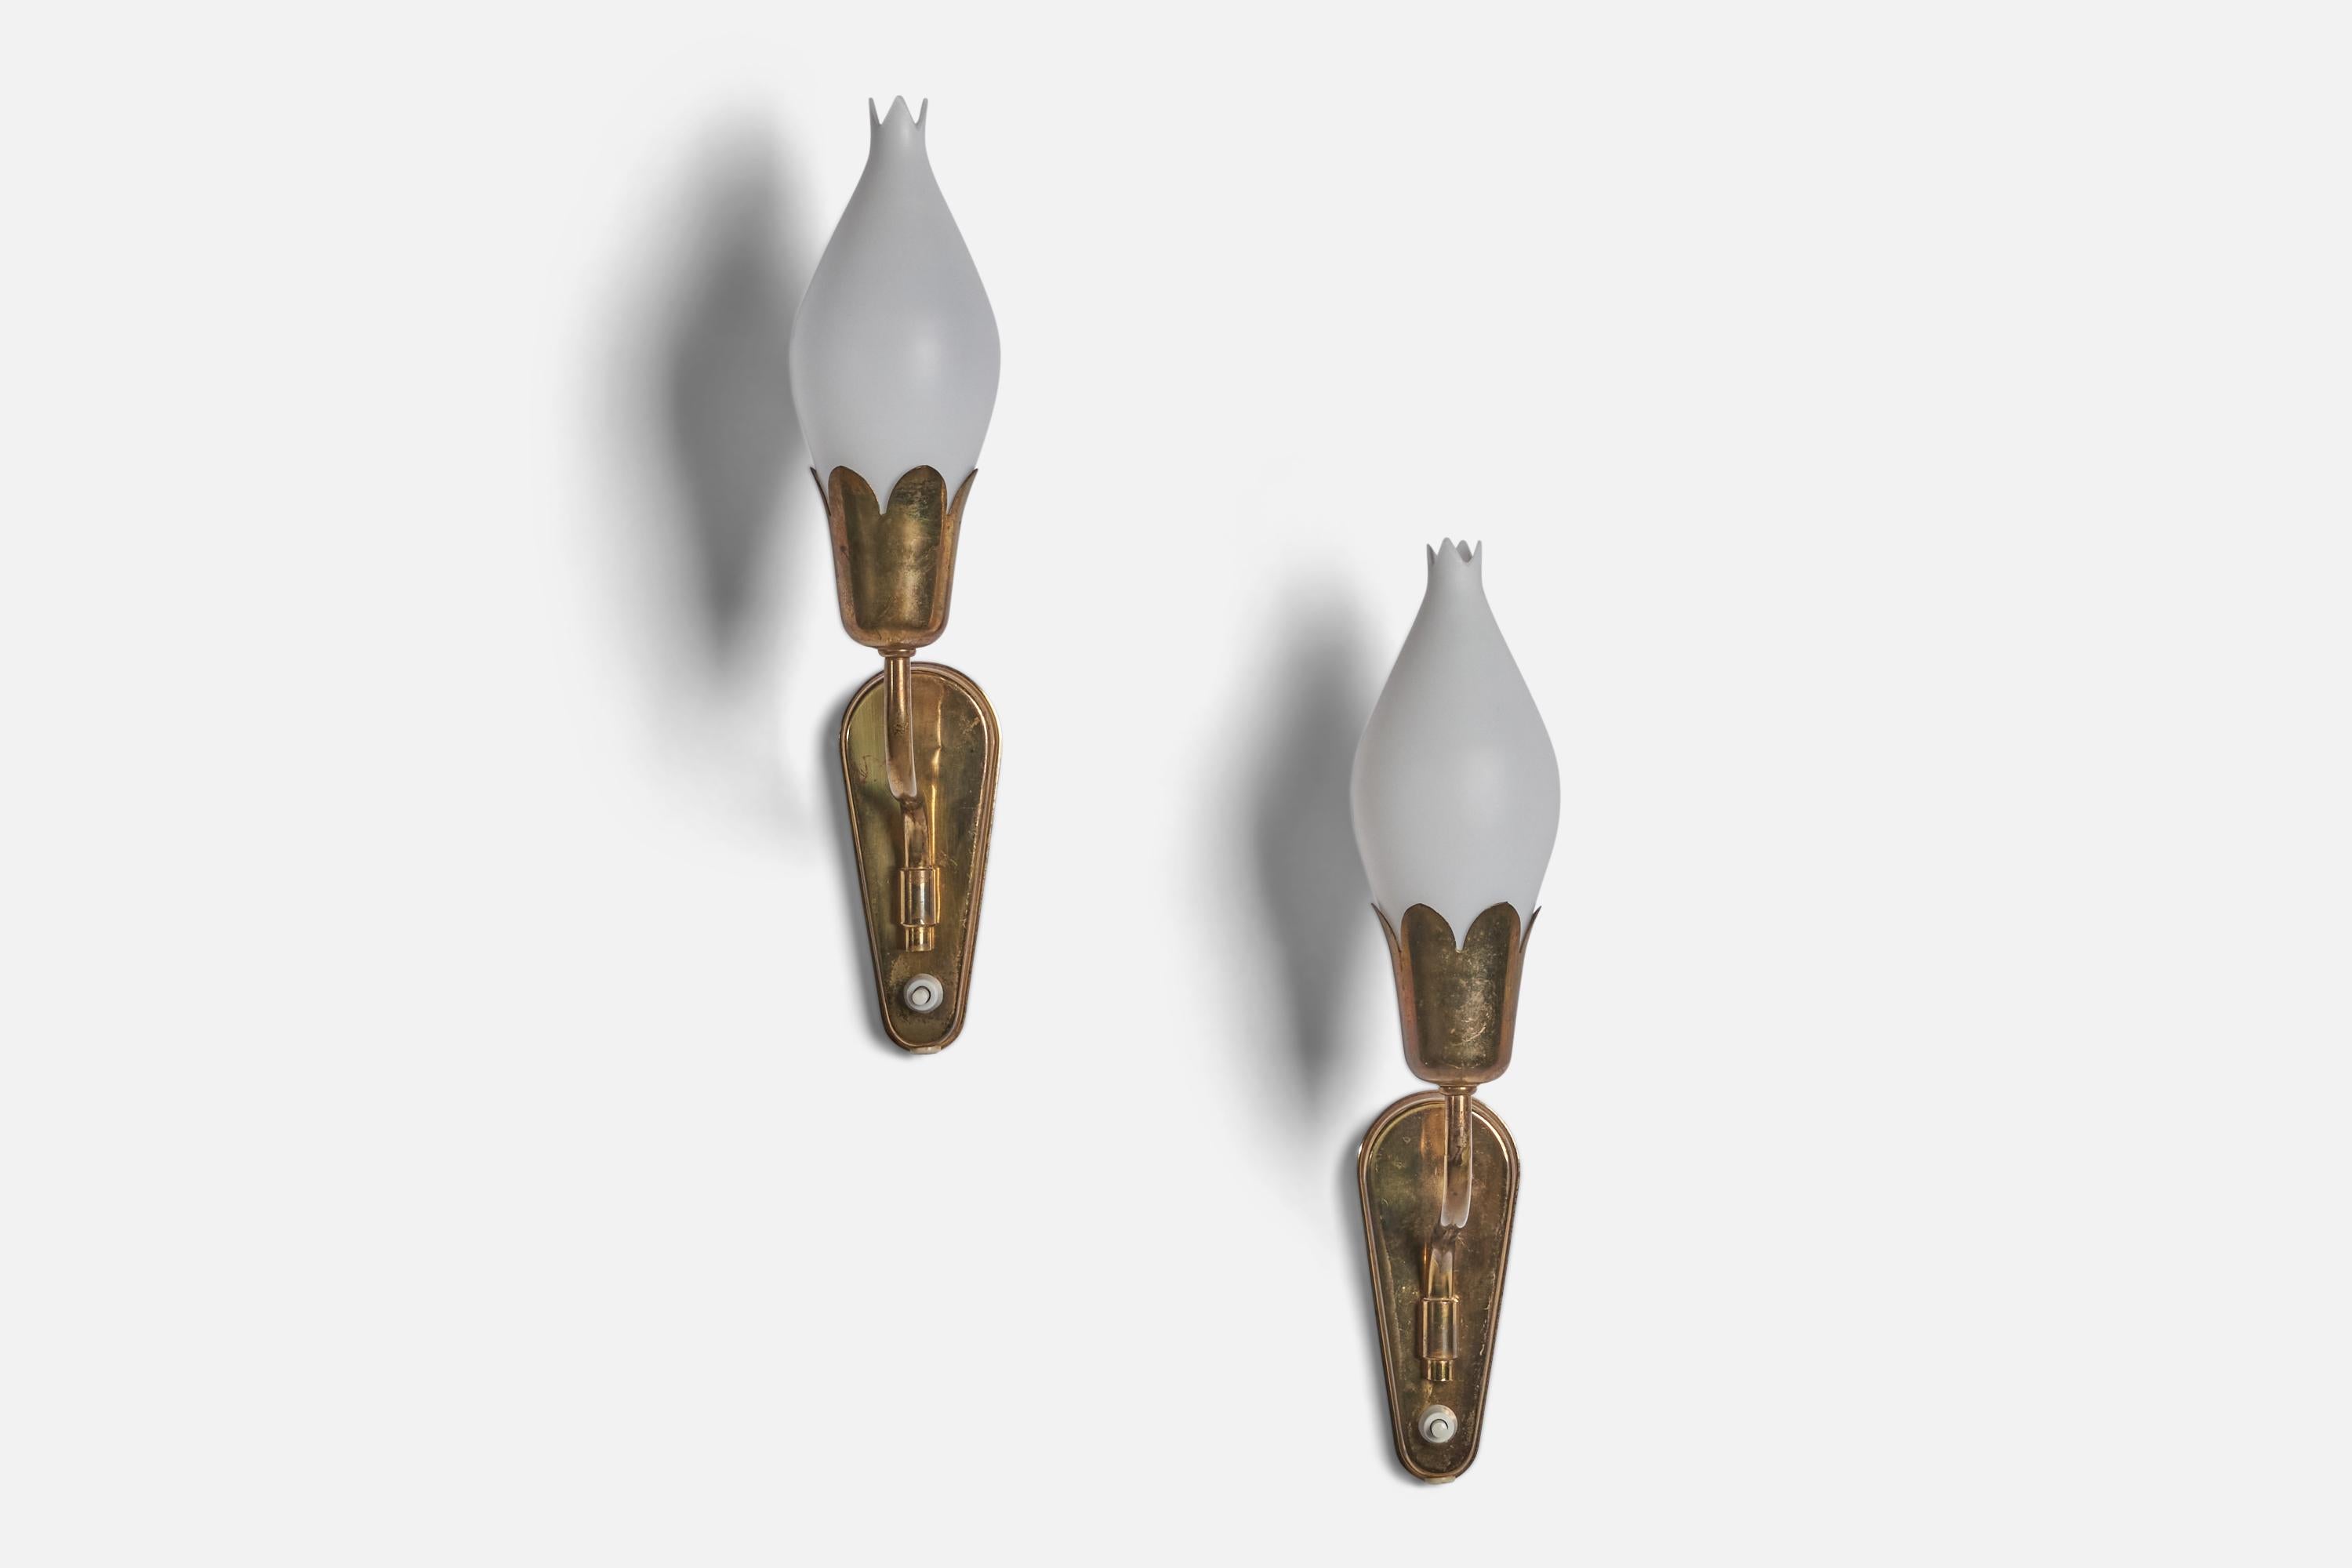 A pair of brass and opaline glass wall lights designed and produced in Denmark, 1950s.

Overall Dimensions (inches): 14.5” H x 3” W x 5.5” D 
Back Plate Dimensions (inches): 6” H x 2.5” W x 0.6” D
Bulb Specifications: E-14 Bulb
Number of Sockets: